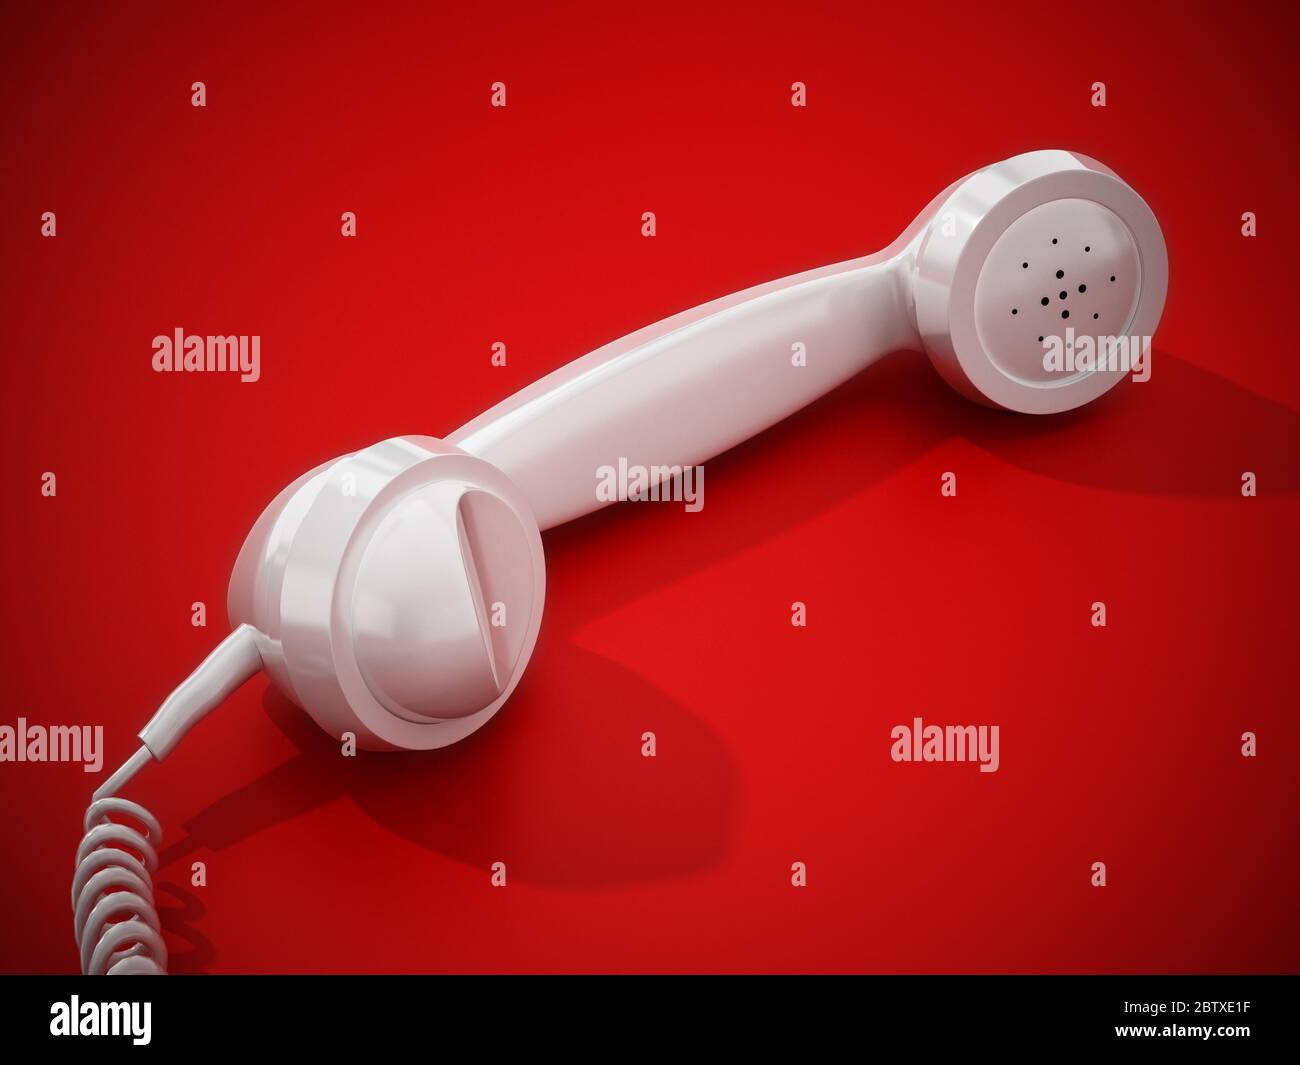 White vintage phone receiver and wire isolated on red background. 3D illustration. Stock Photo